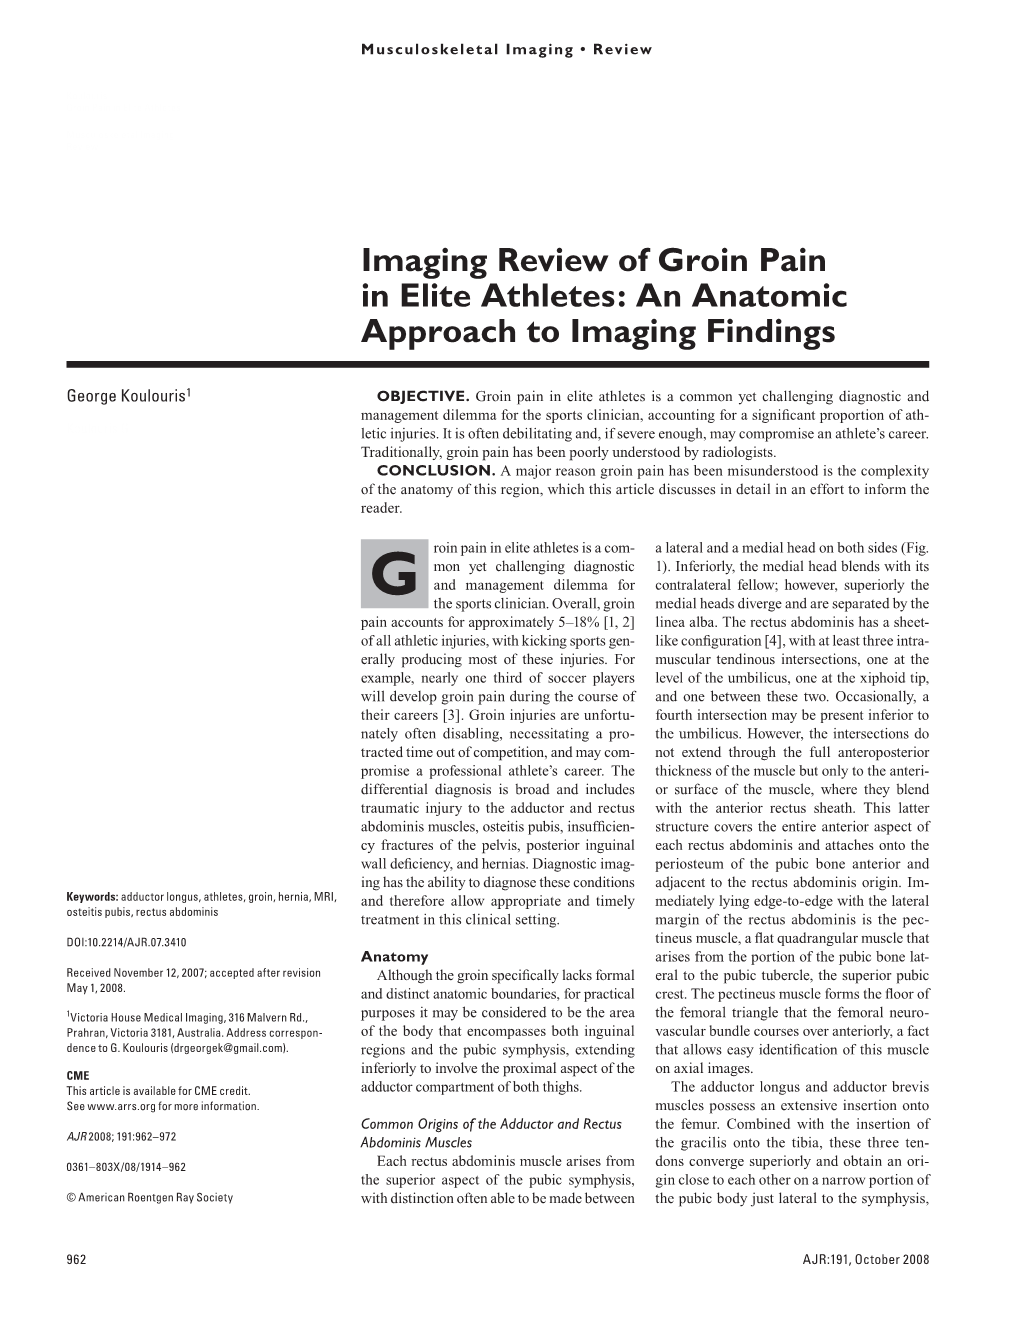 Imaging Review of Groin Pain in Elite Athletes: an Anatomic Approach to Imaging Findings